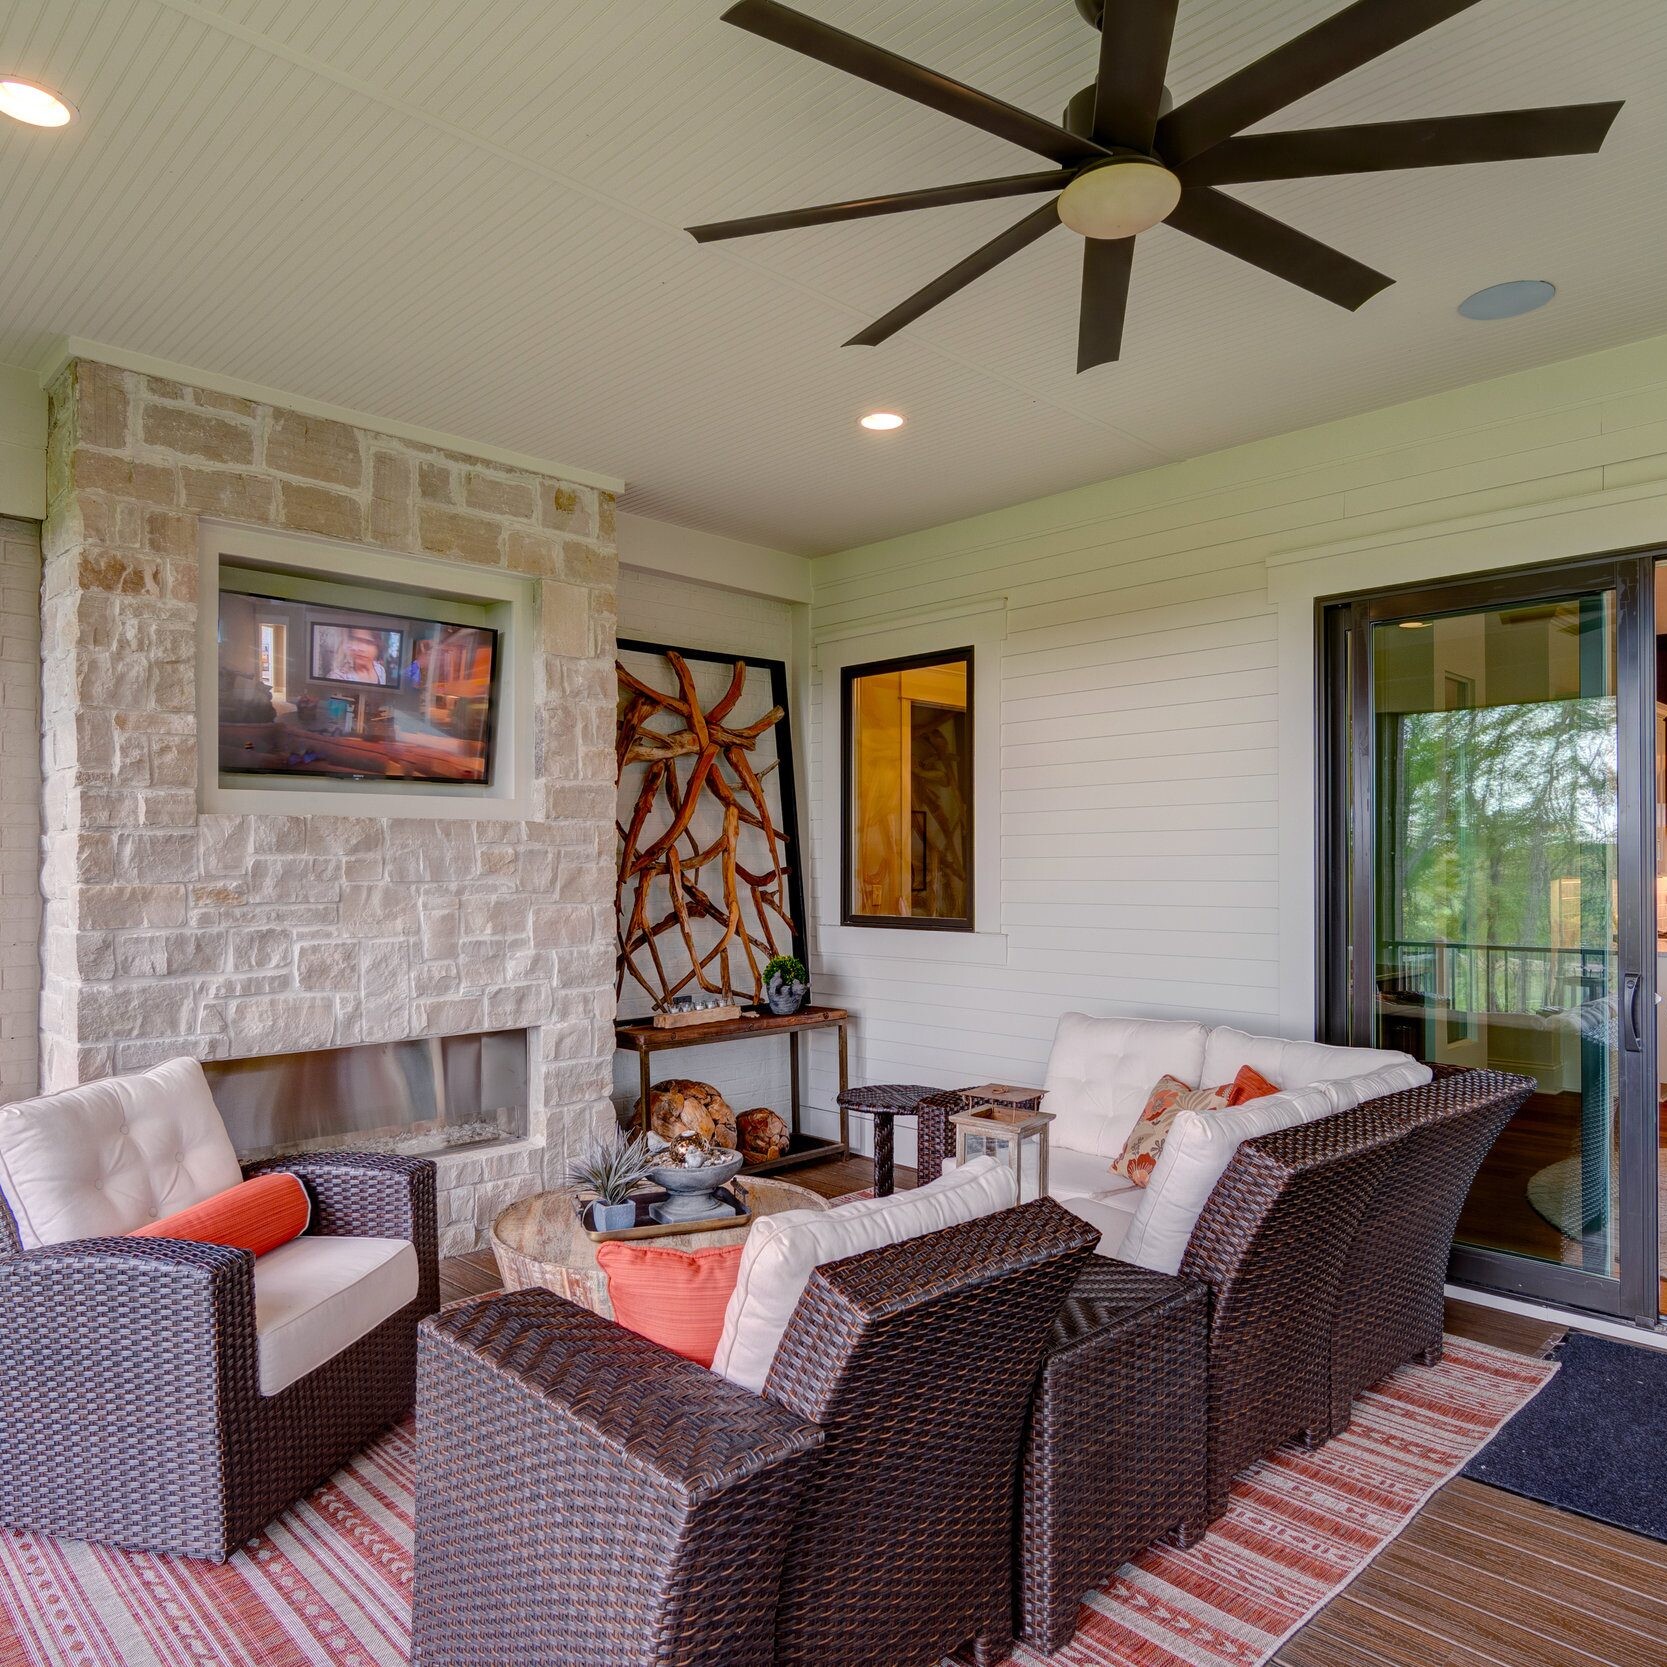 A patio with wicker furniture and a ceiling fan, designed by a custom home builder in Carmel Indiana.